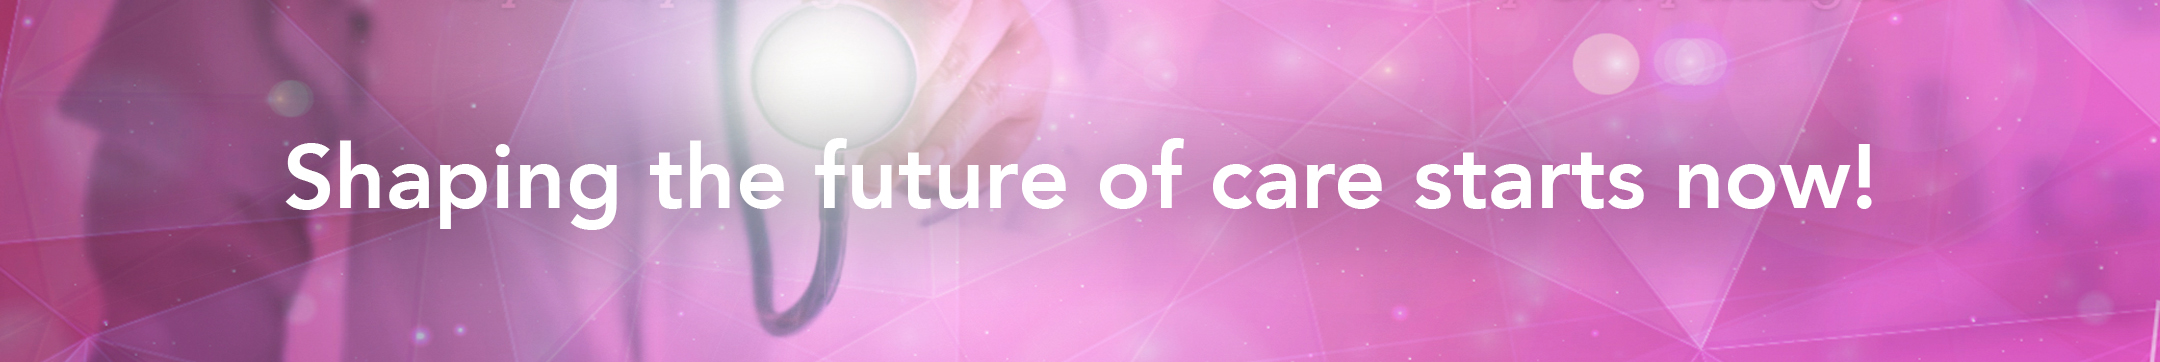 Shaping the future of care starts now!